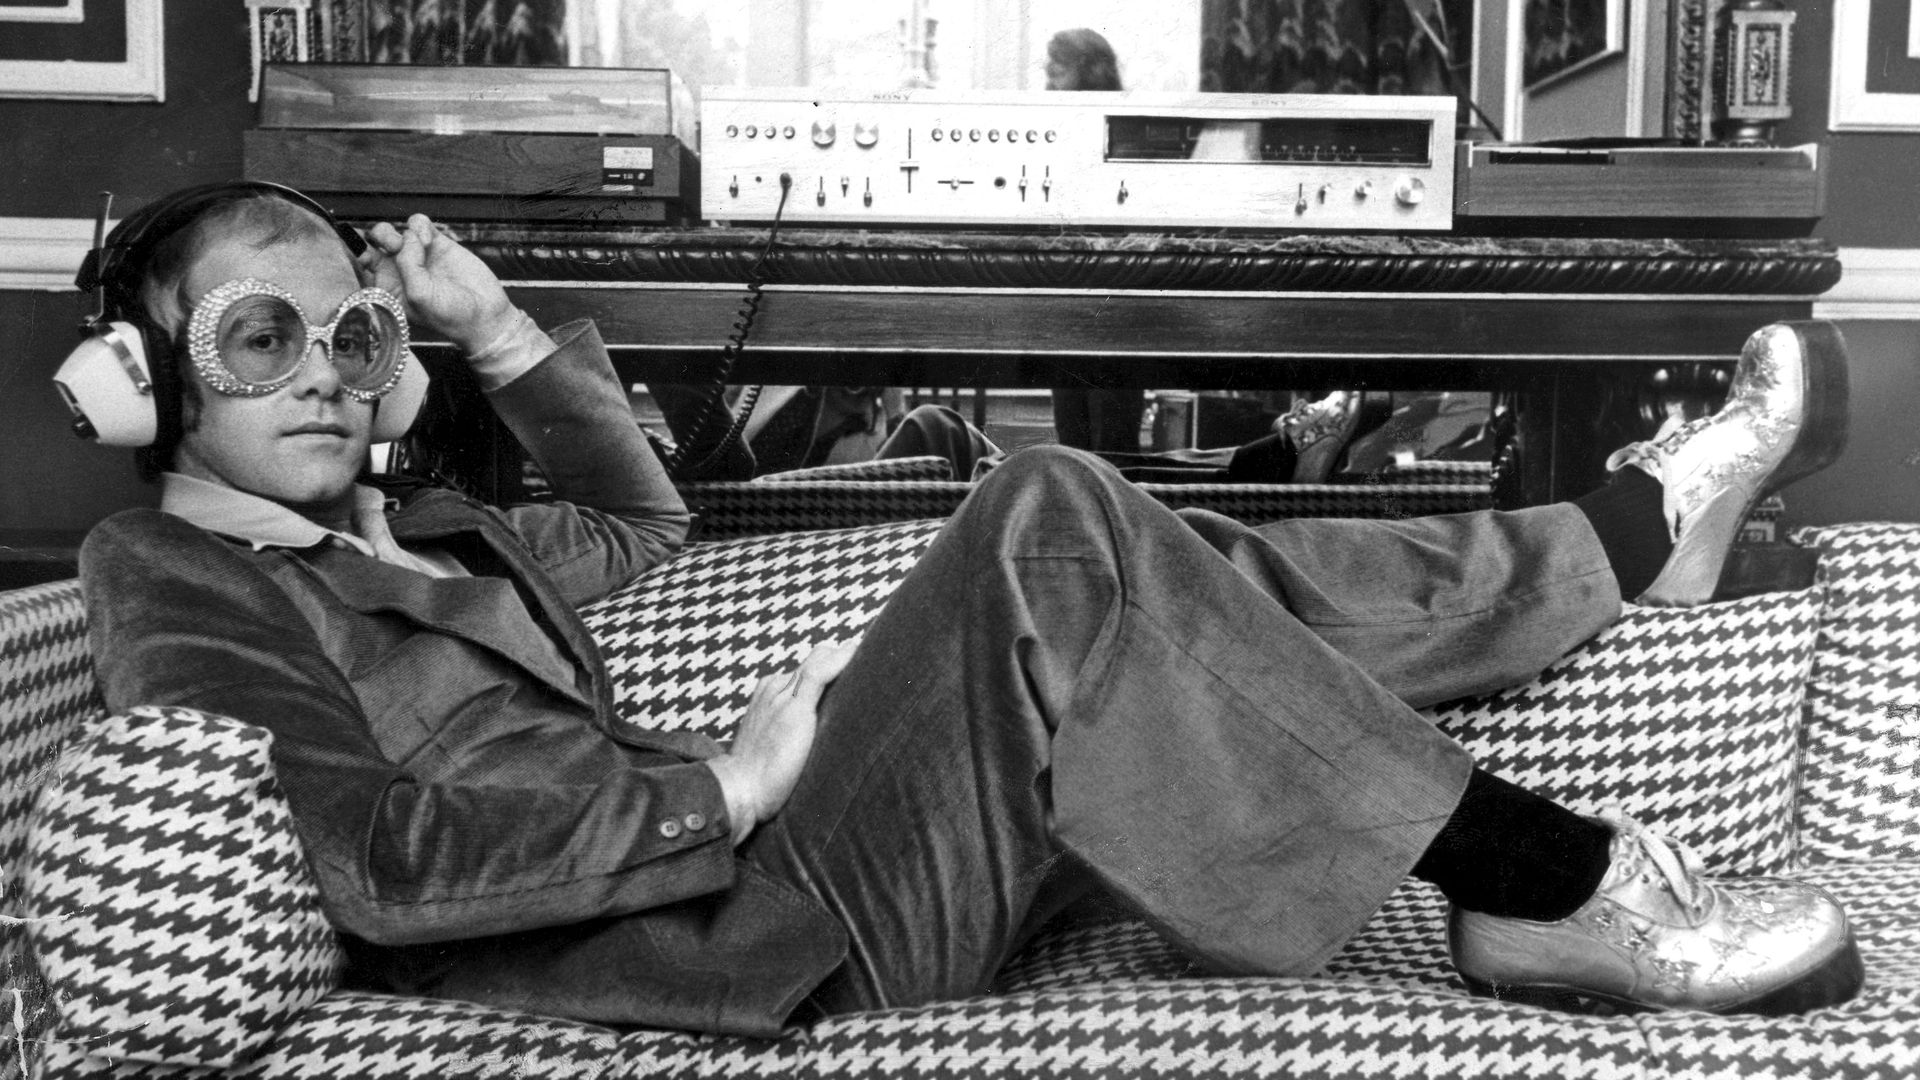 Elton John lounging on a couch and listening to music